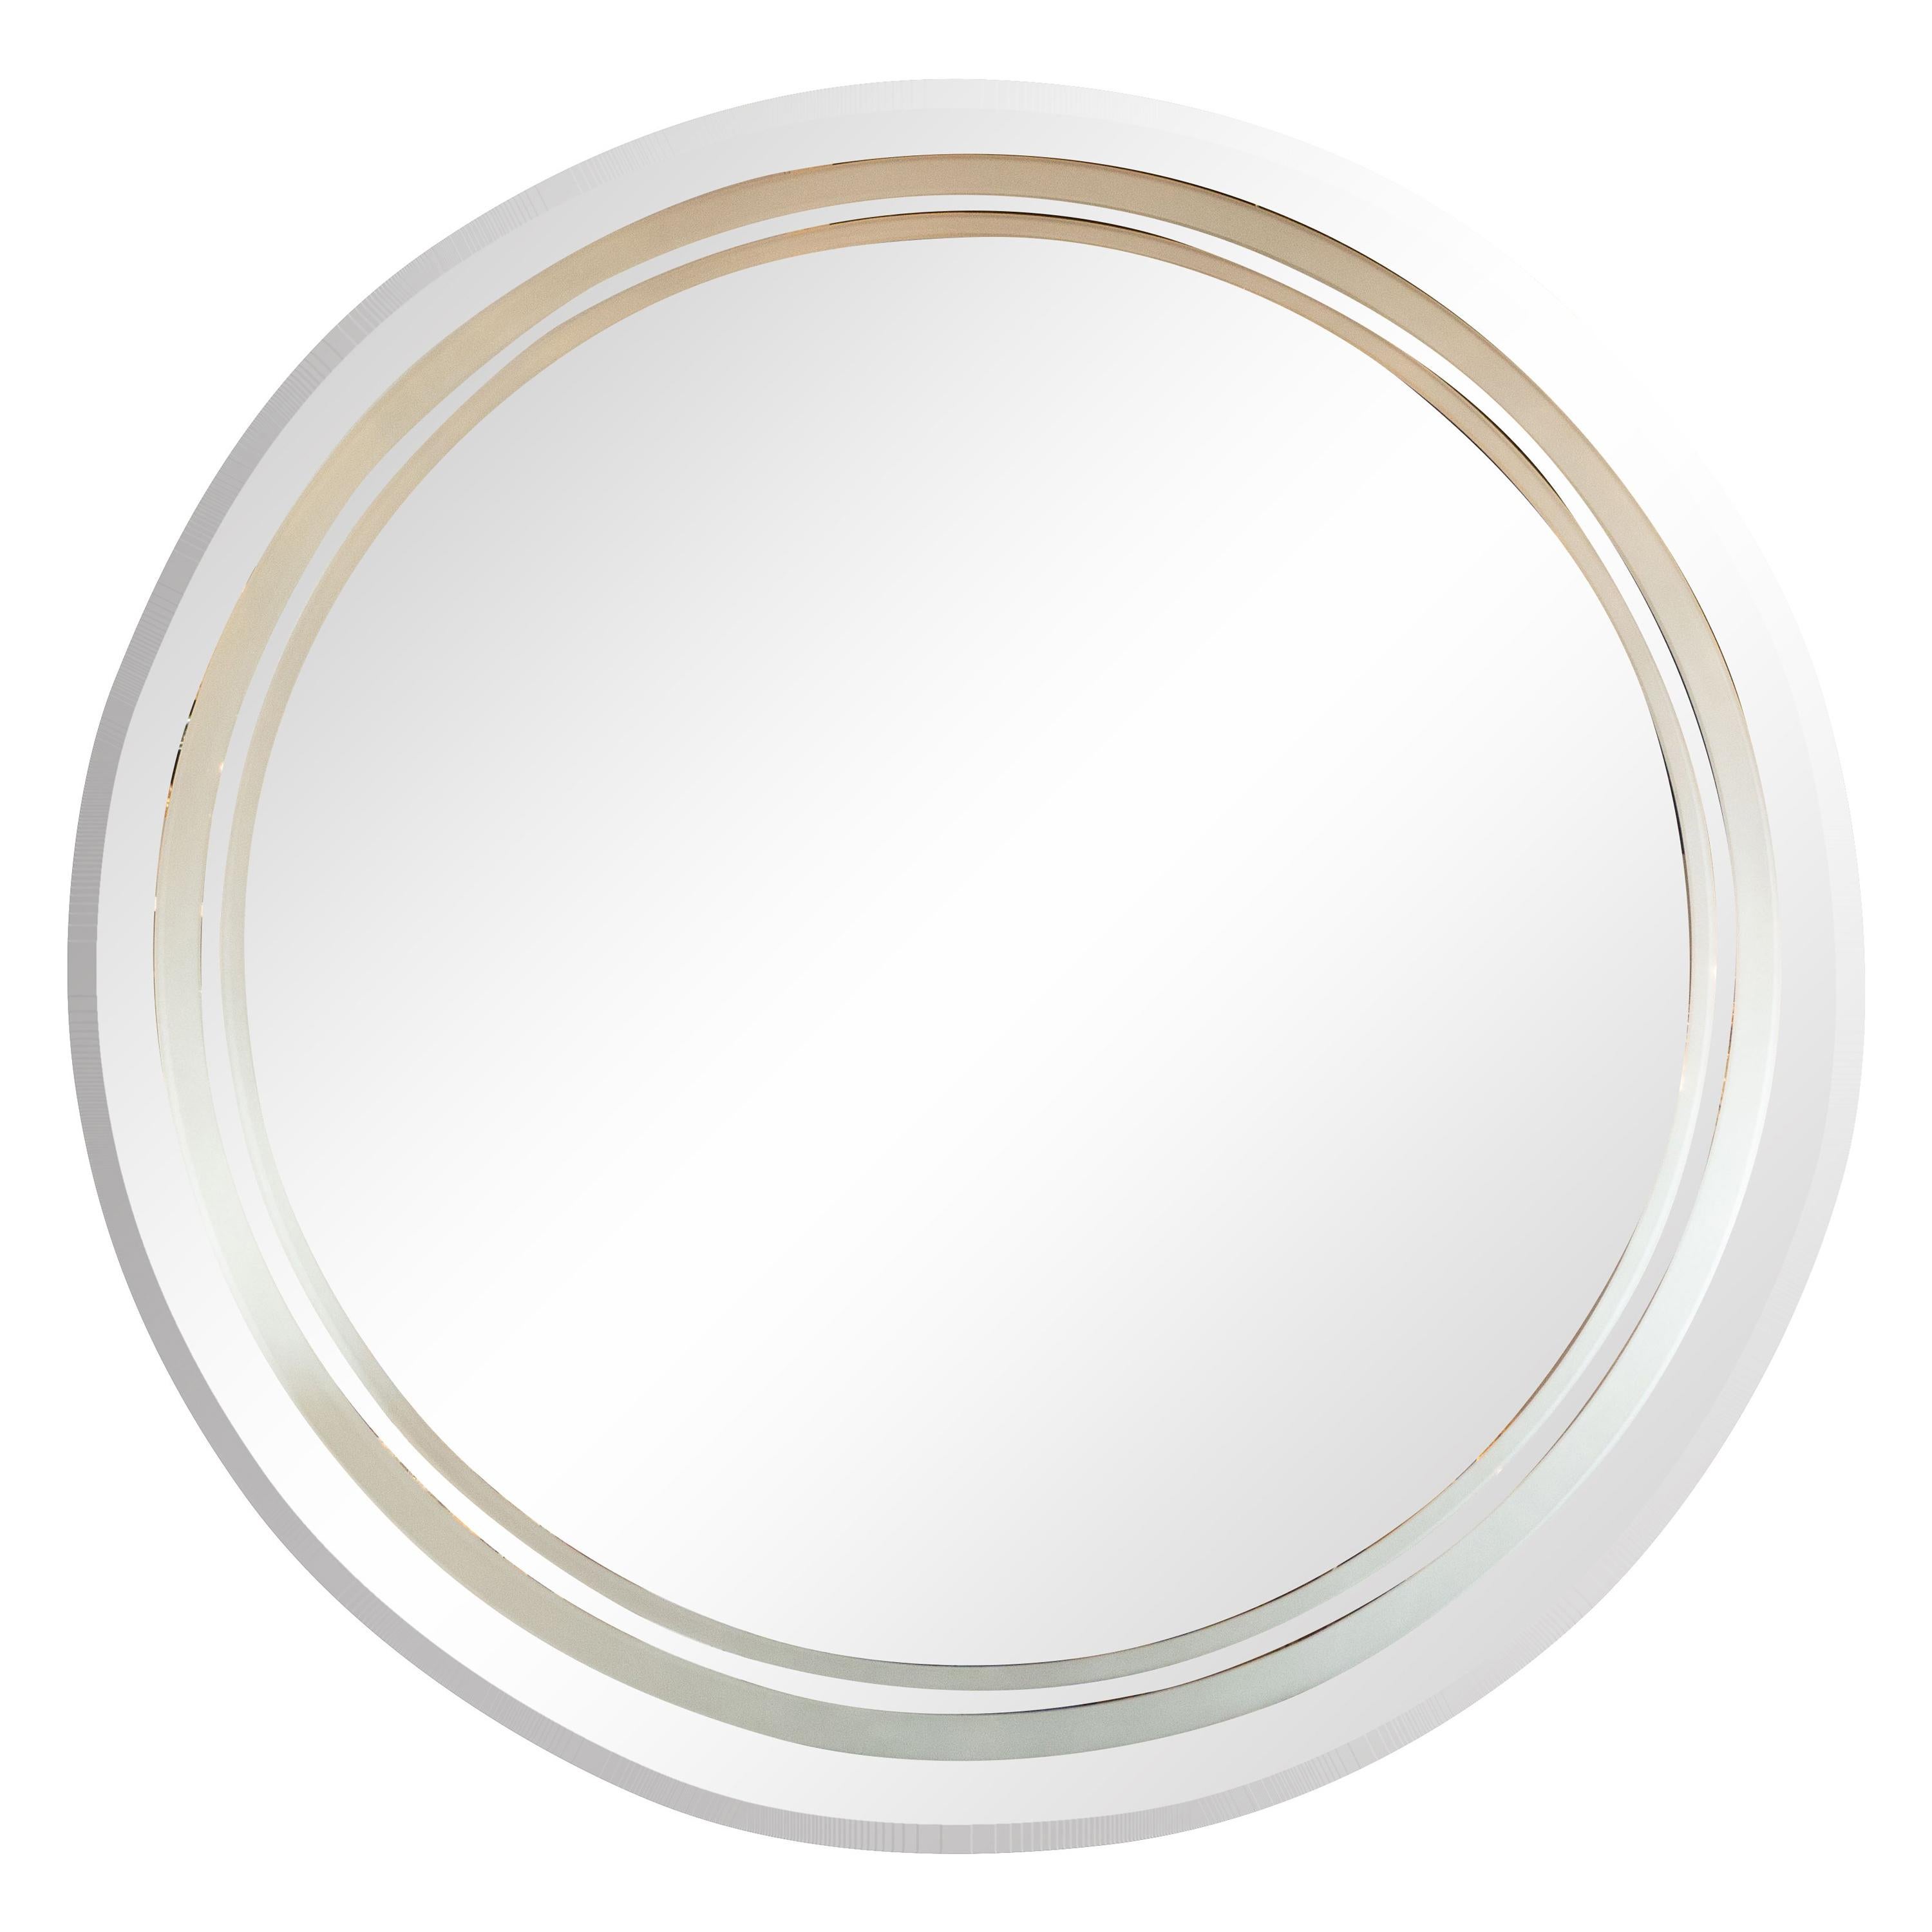 Art Deco Revival Beveled Circular Mirror with Acid Etched Frosted Banding